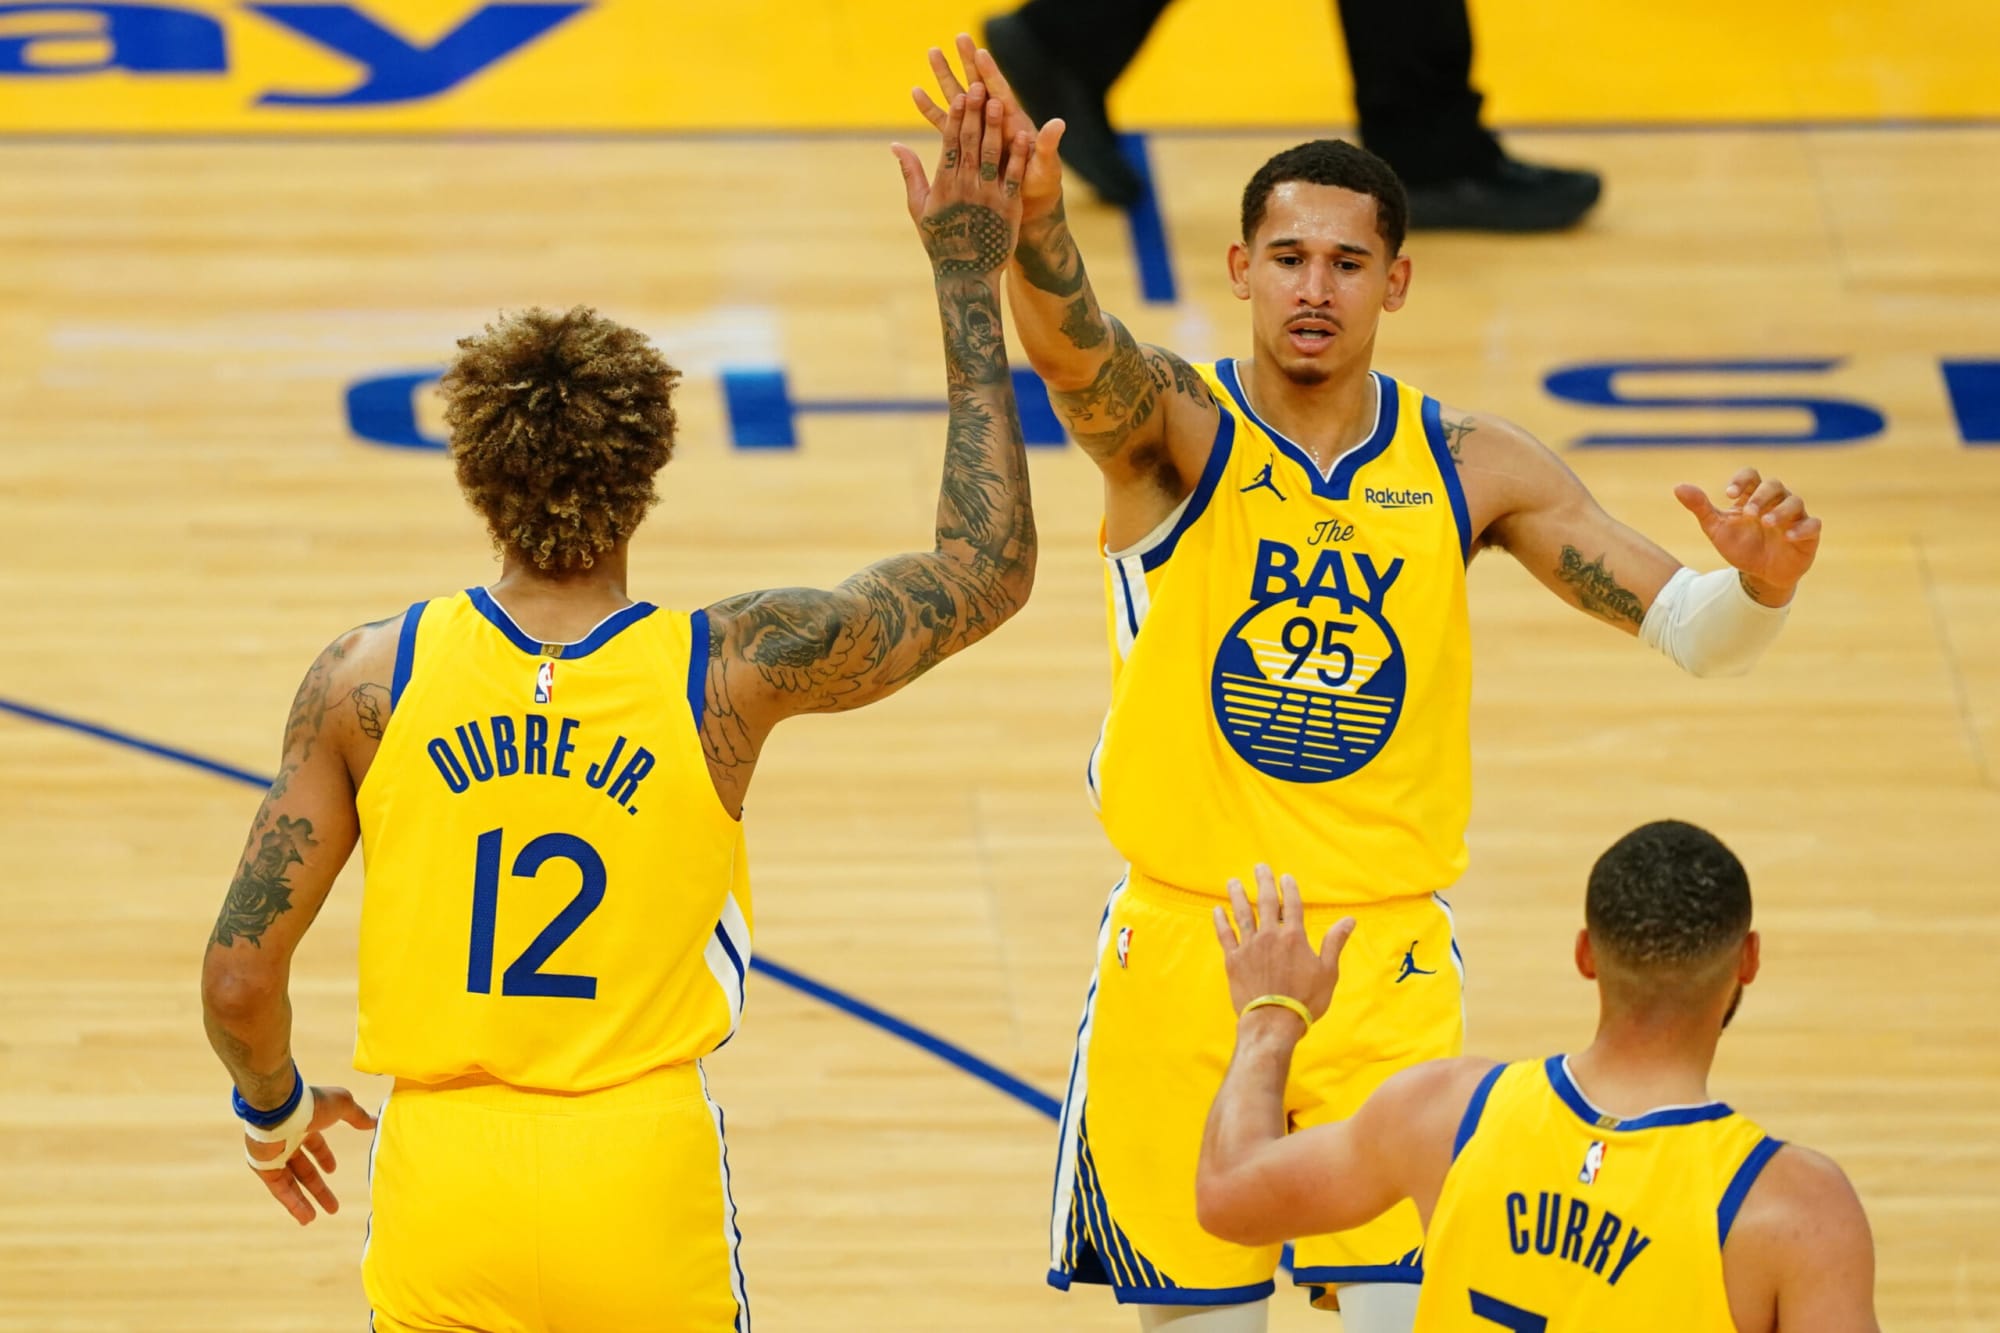 NBA champion finds new team after interest from Golden State Warriors